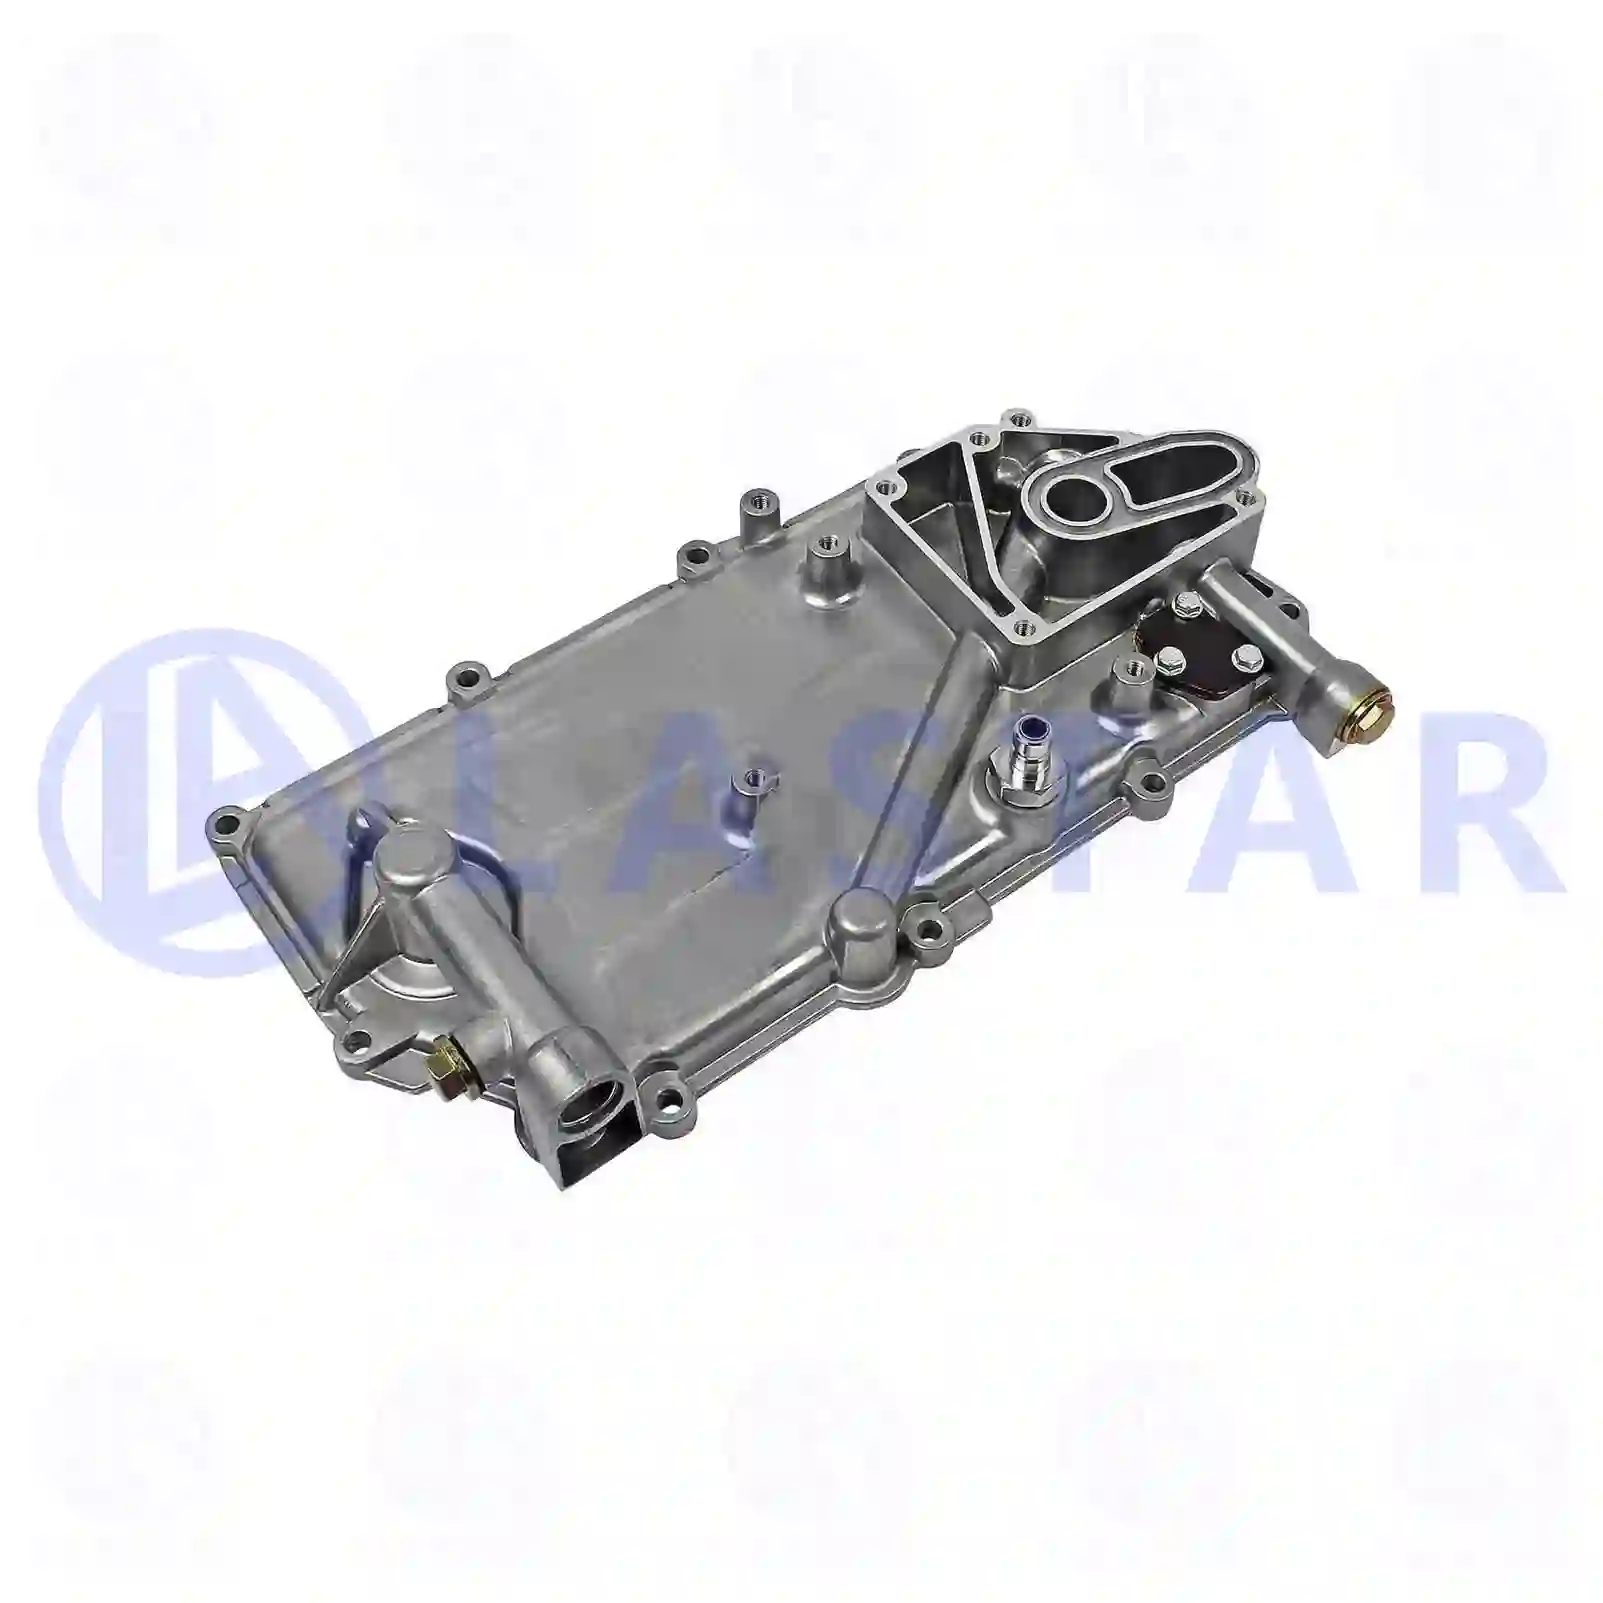 Oil cooler cover, 77704826, 1429952, 1486406, 1490149, 1537961, 1548996, 1729232, 1773023, 1774202, 1795526, 2010938, ZG01681-0008 ||  77704826 Lastar Spare Part | Truck Spare Parts, Auotomotive Spare Parts Oil cooler cover, 77704826, 1429952, 1486406, 1490149, 1537961, 1548996, 1729232, 1773023, 1774202, 1795526, 2010938, ZG01681-0008 ||  77704826 Lastar Spare Part | Truck Spare Parts, Auotomotive Spare Parts